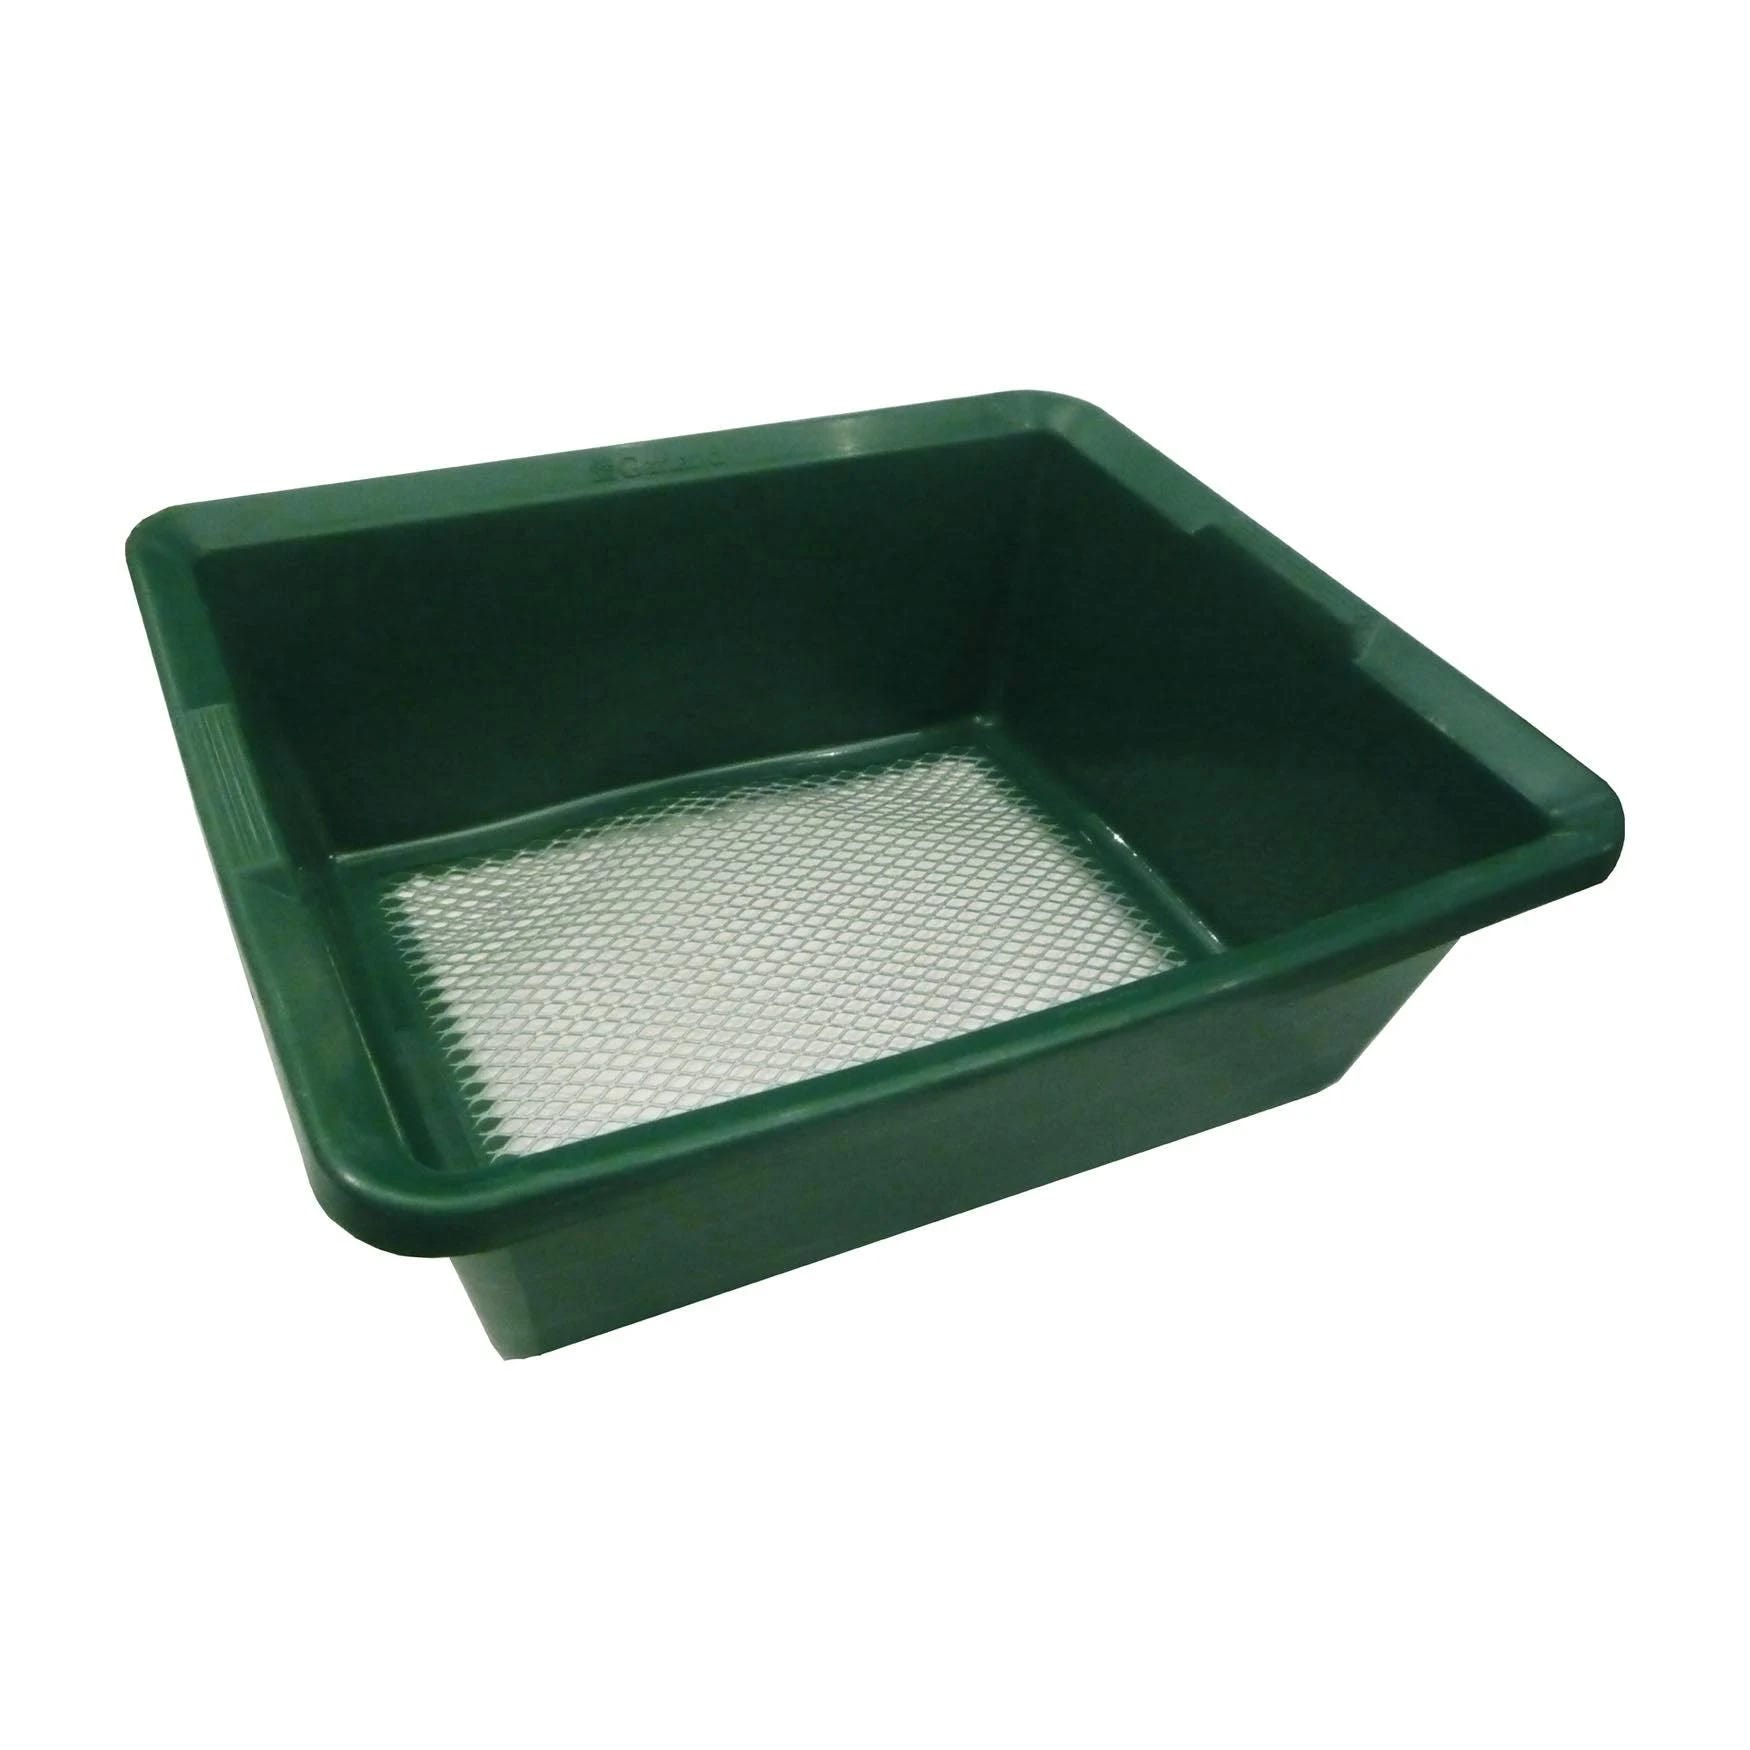 Tough Mesh Strainer with High-Quality Recycled Materials | Image